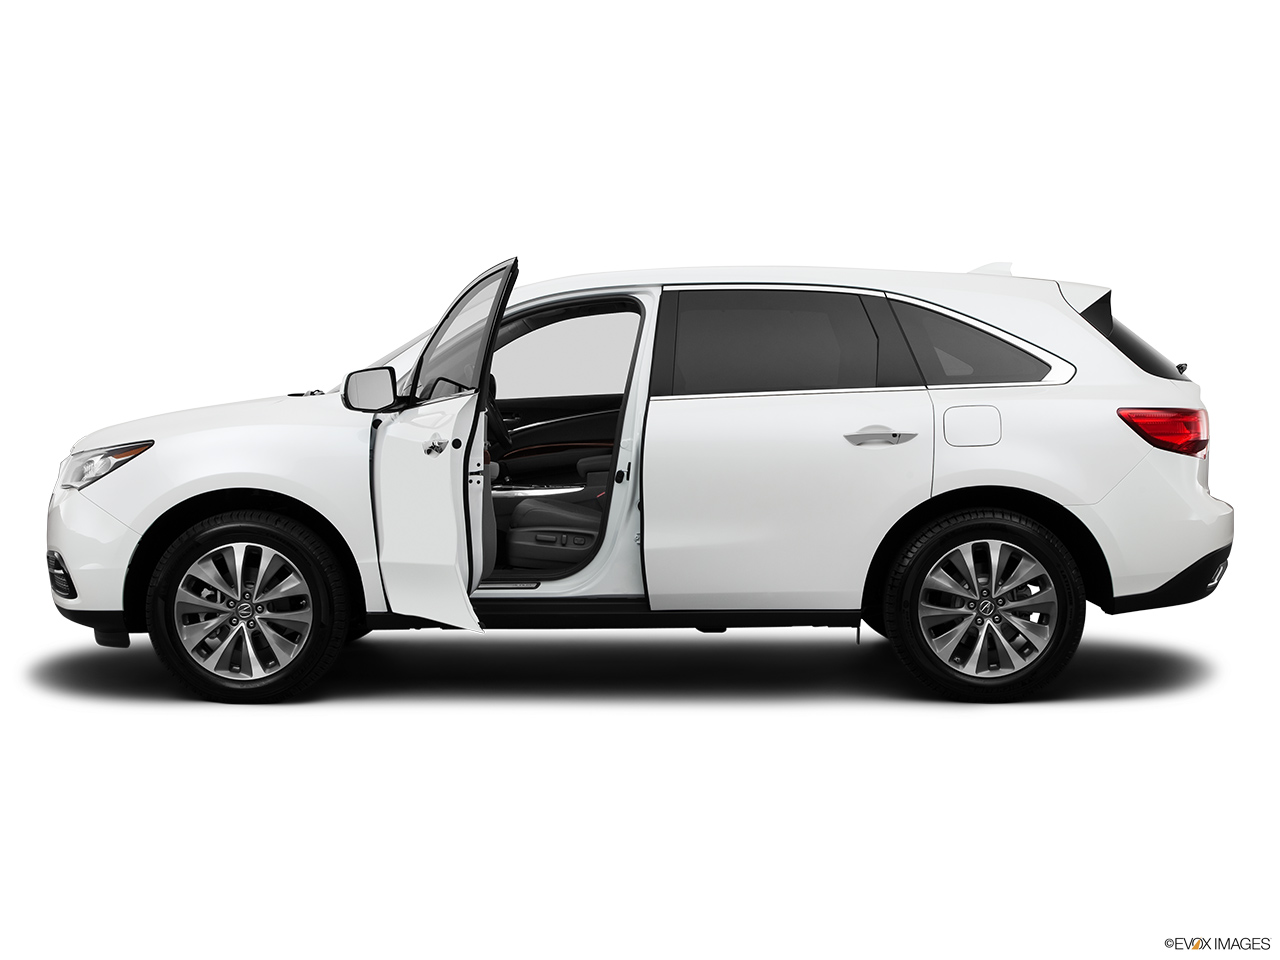 2014 Acura MDX SH-AWD Driver's side profile with drivers side door open. 